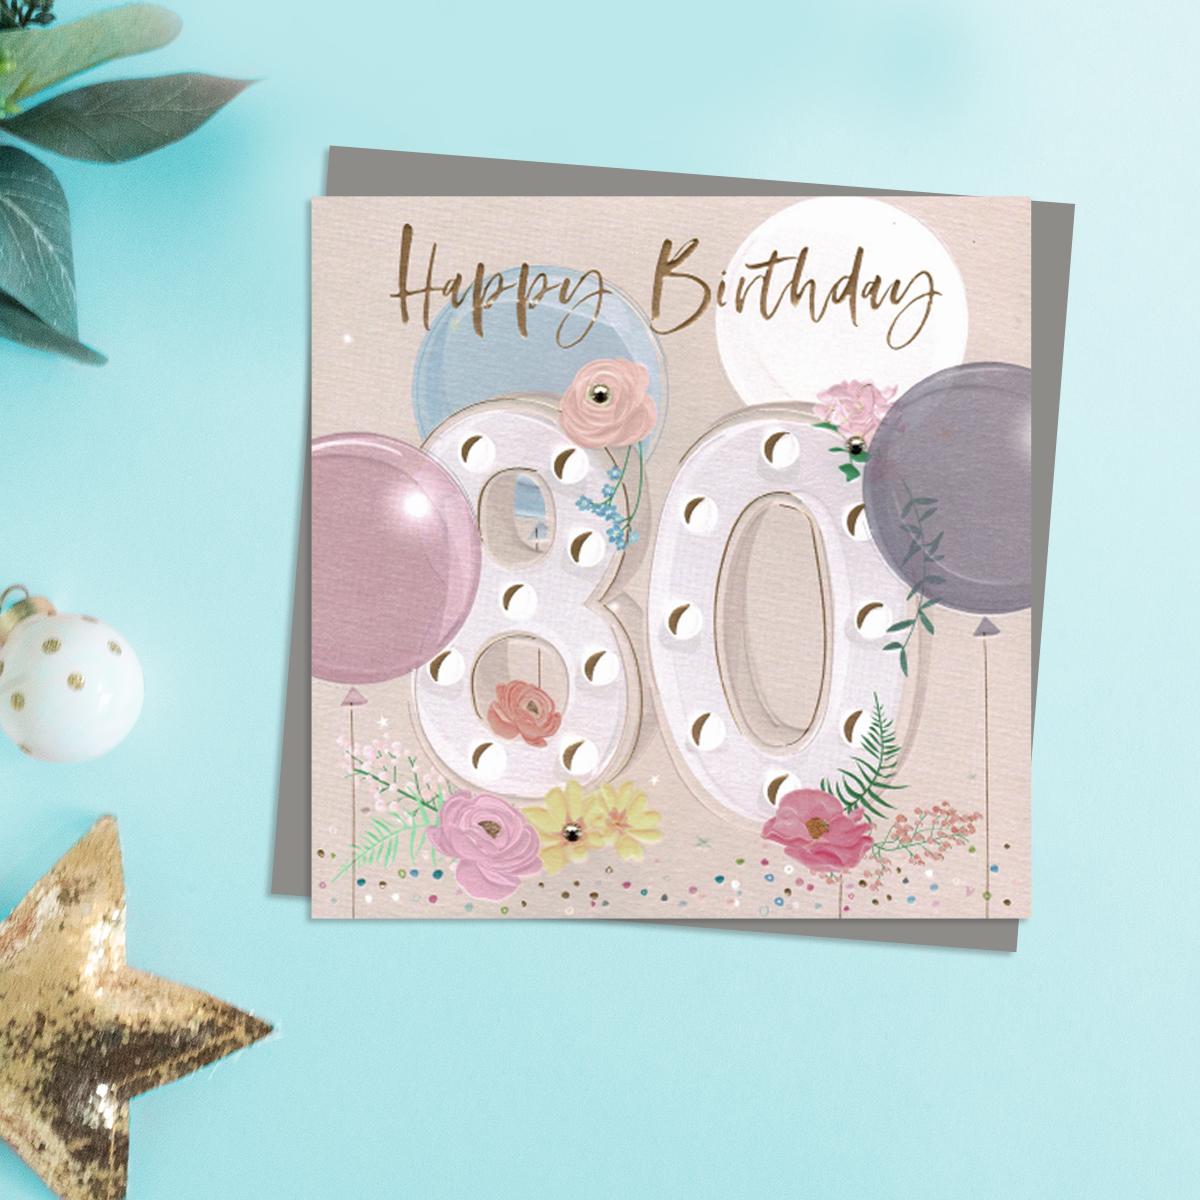 Happy 80th Birthday Design Featuring Embellished Flowers And Balloons. Completed With Gold Foil lettering And A Co-Ordinating Grey Envelope